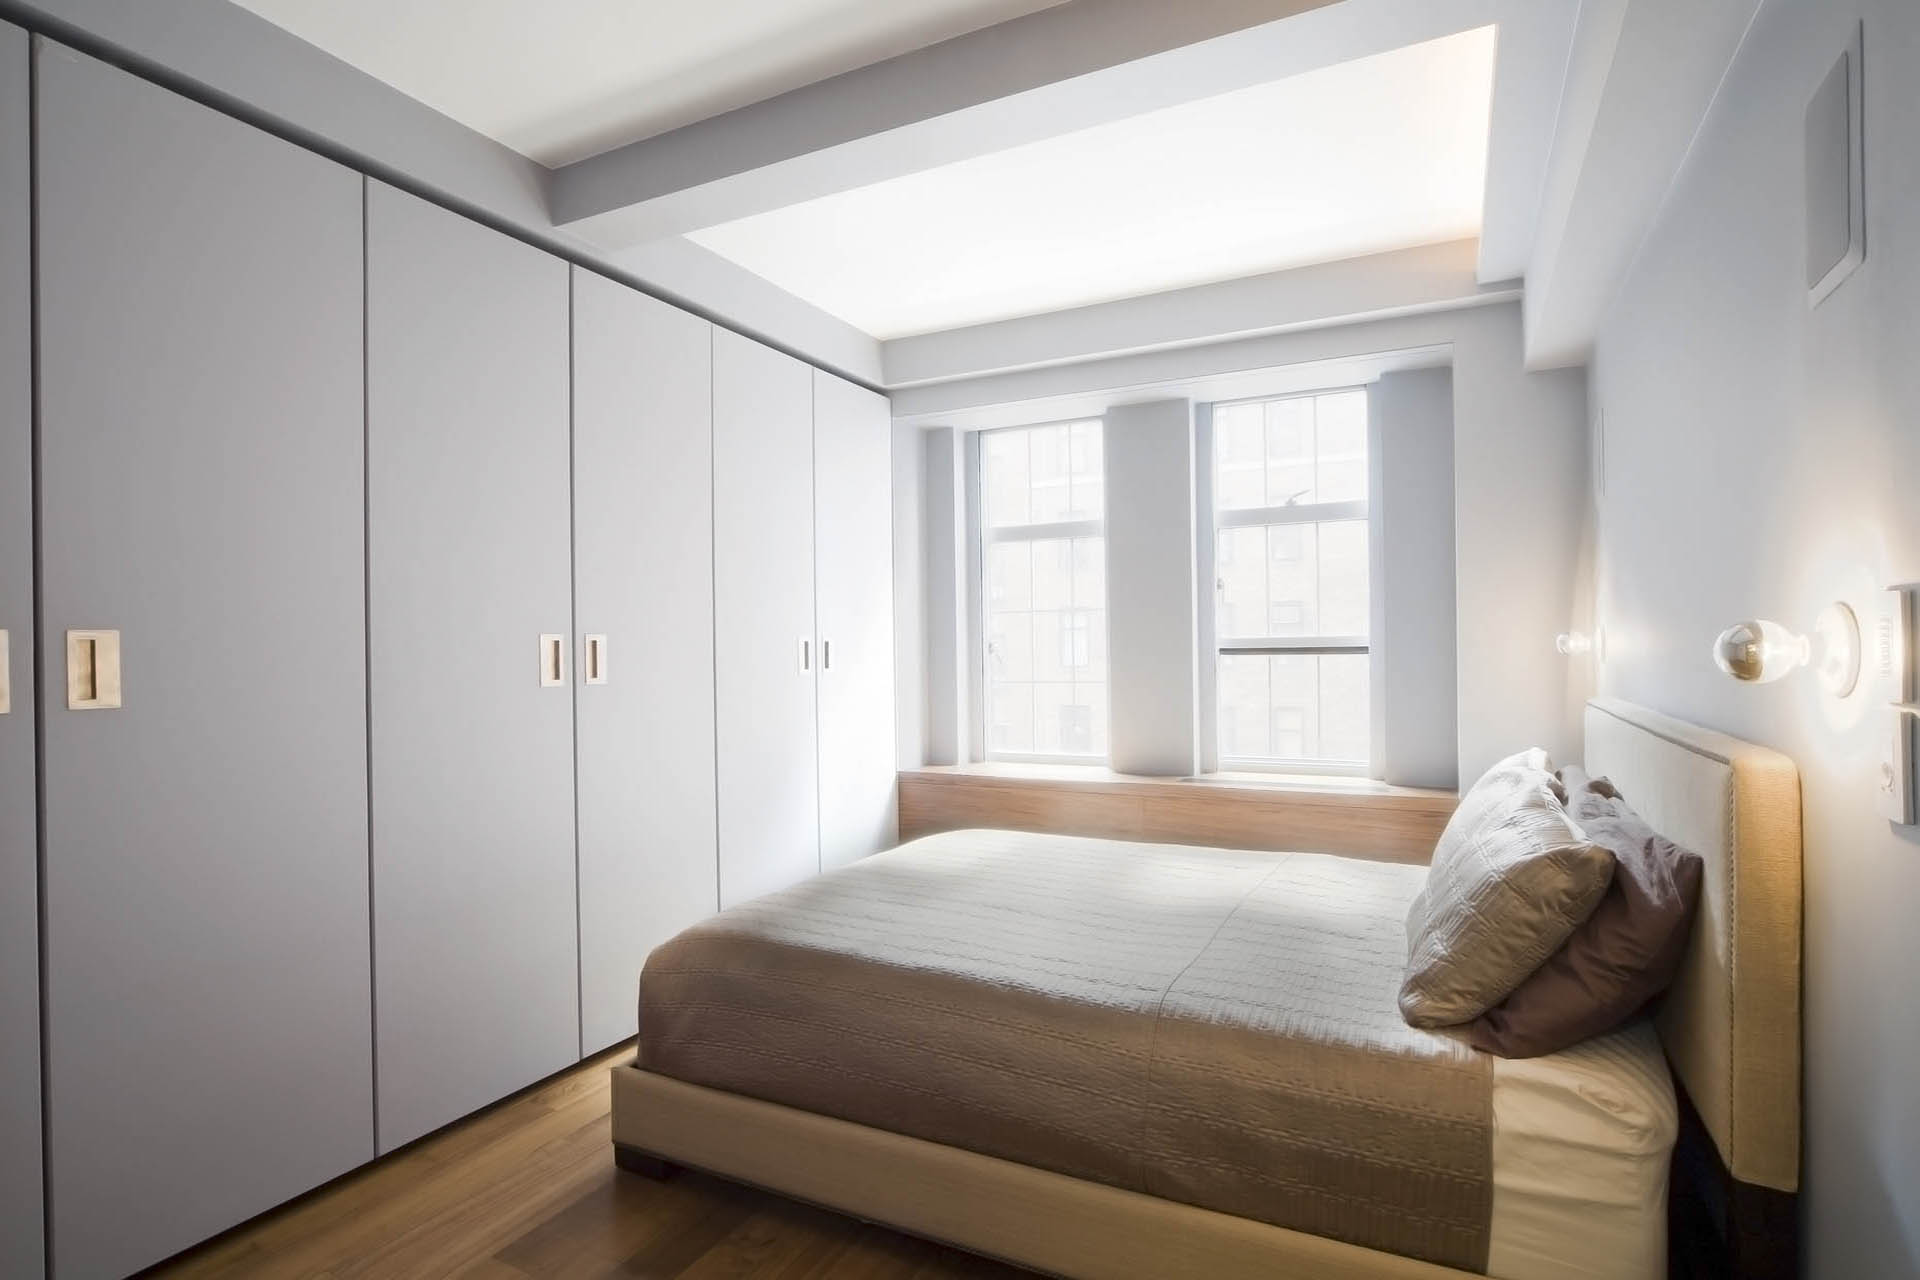 Bedroom at West 24th Street - Element Design Group NYC